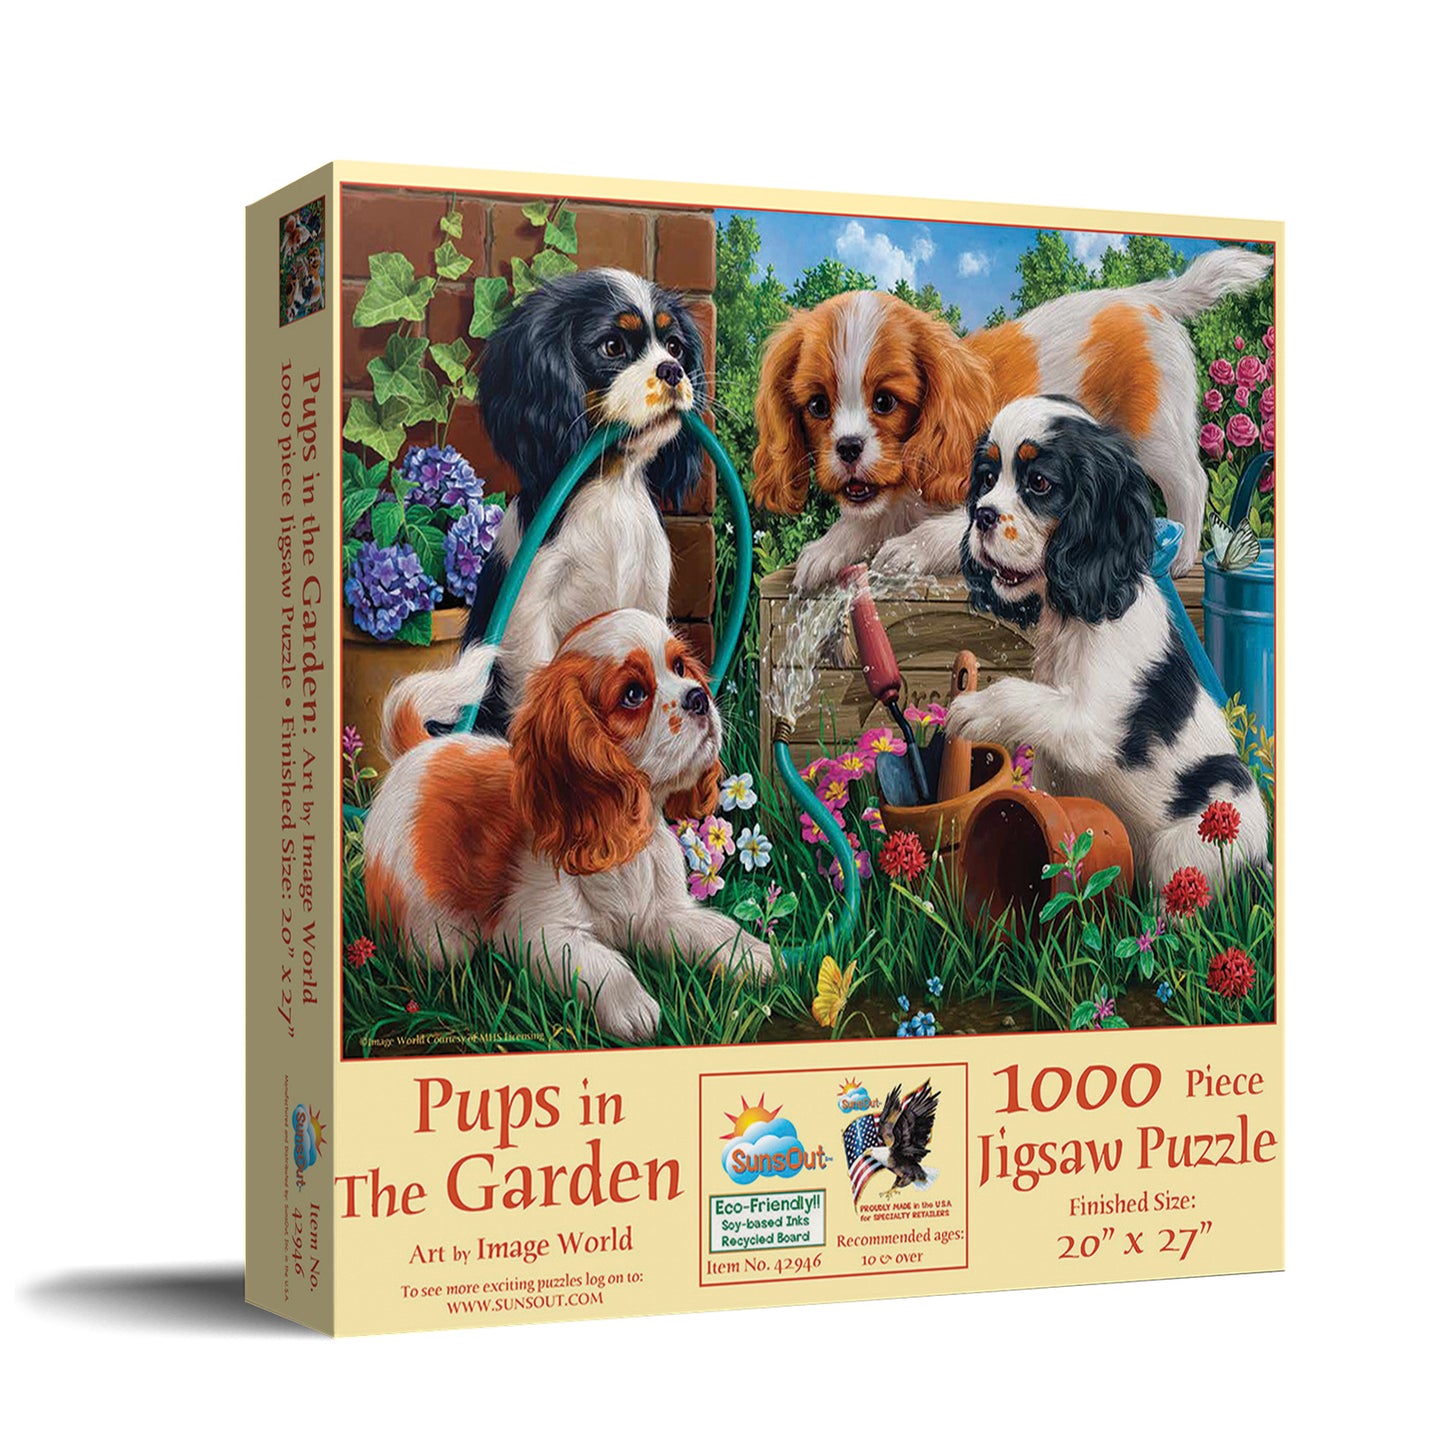 Pups in the Garden - 1000 Piece Jigsaw Puzzle